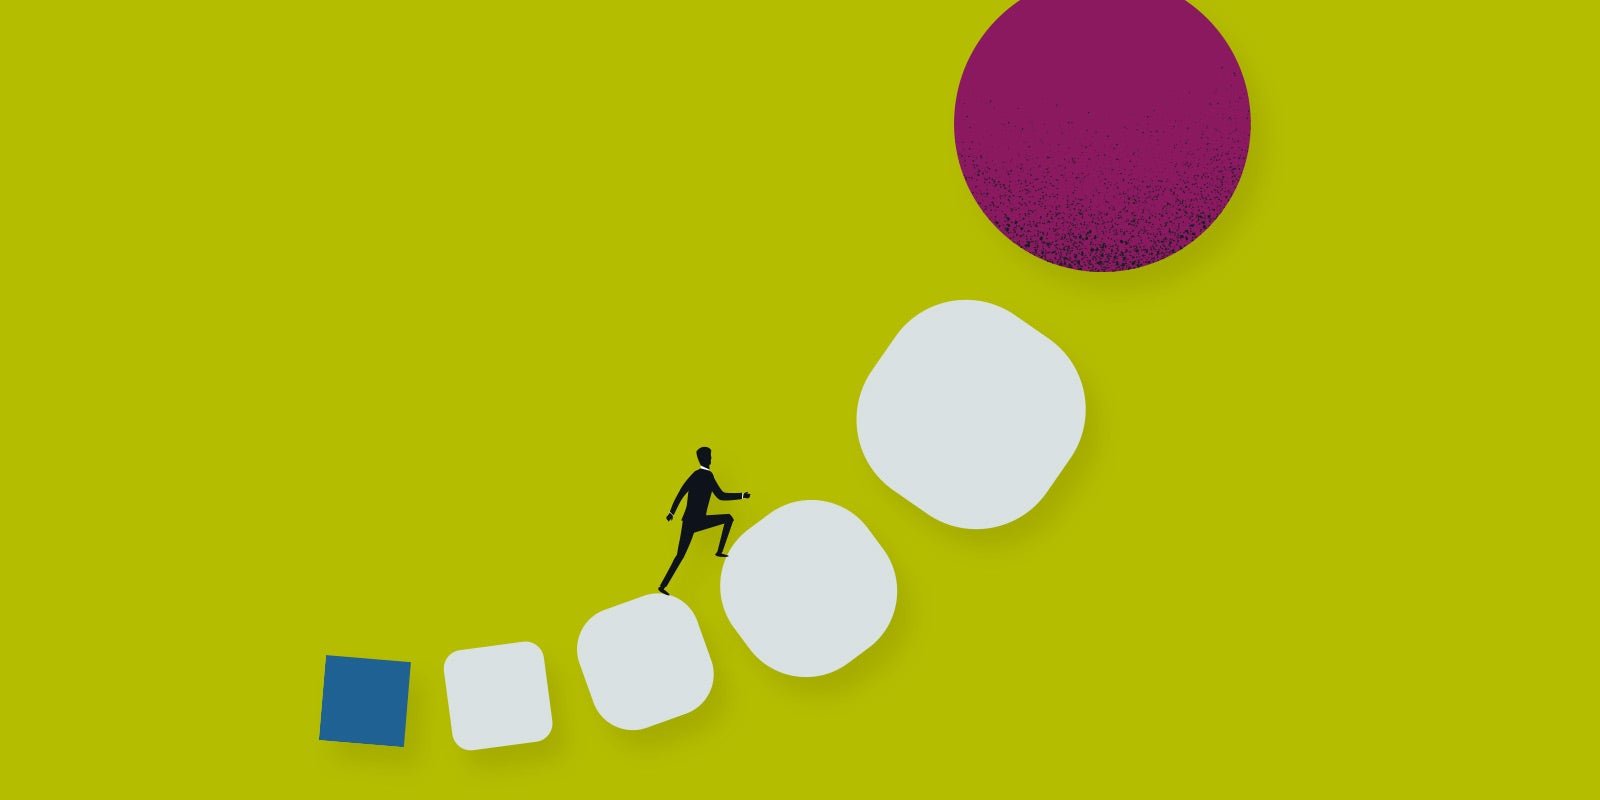 a figure of a business professional climbing a path of blocks growing in size, the last block is circle-shaped, and purple, the whole scene symbolic of the leadership culture he is building at his organization